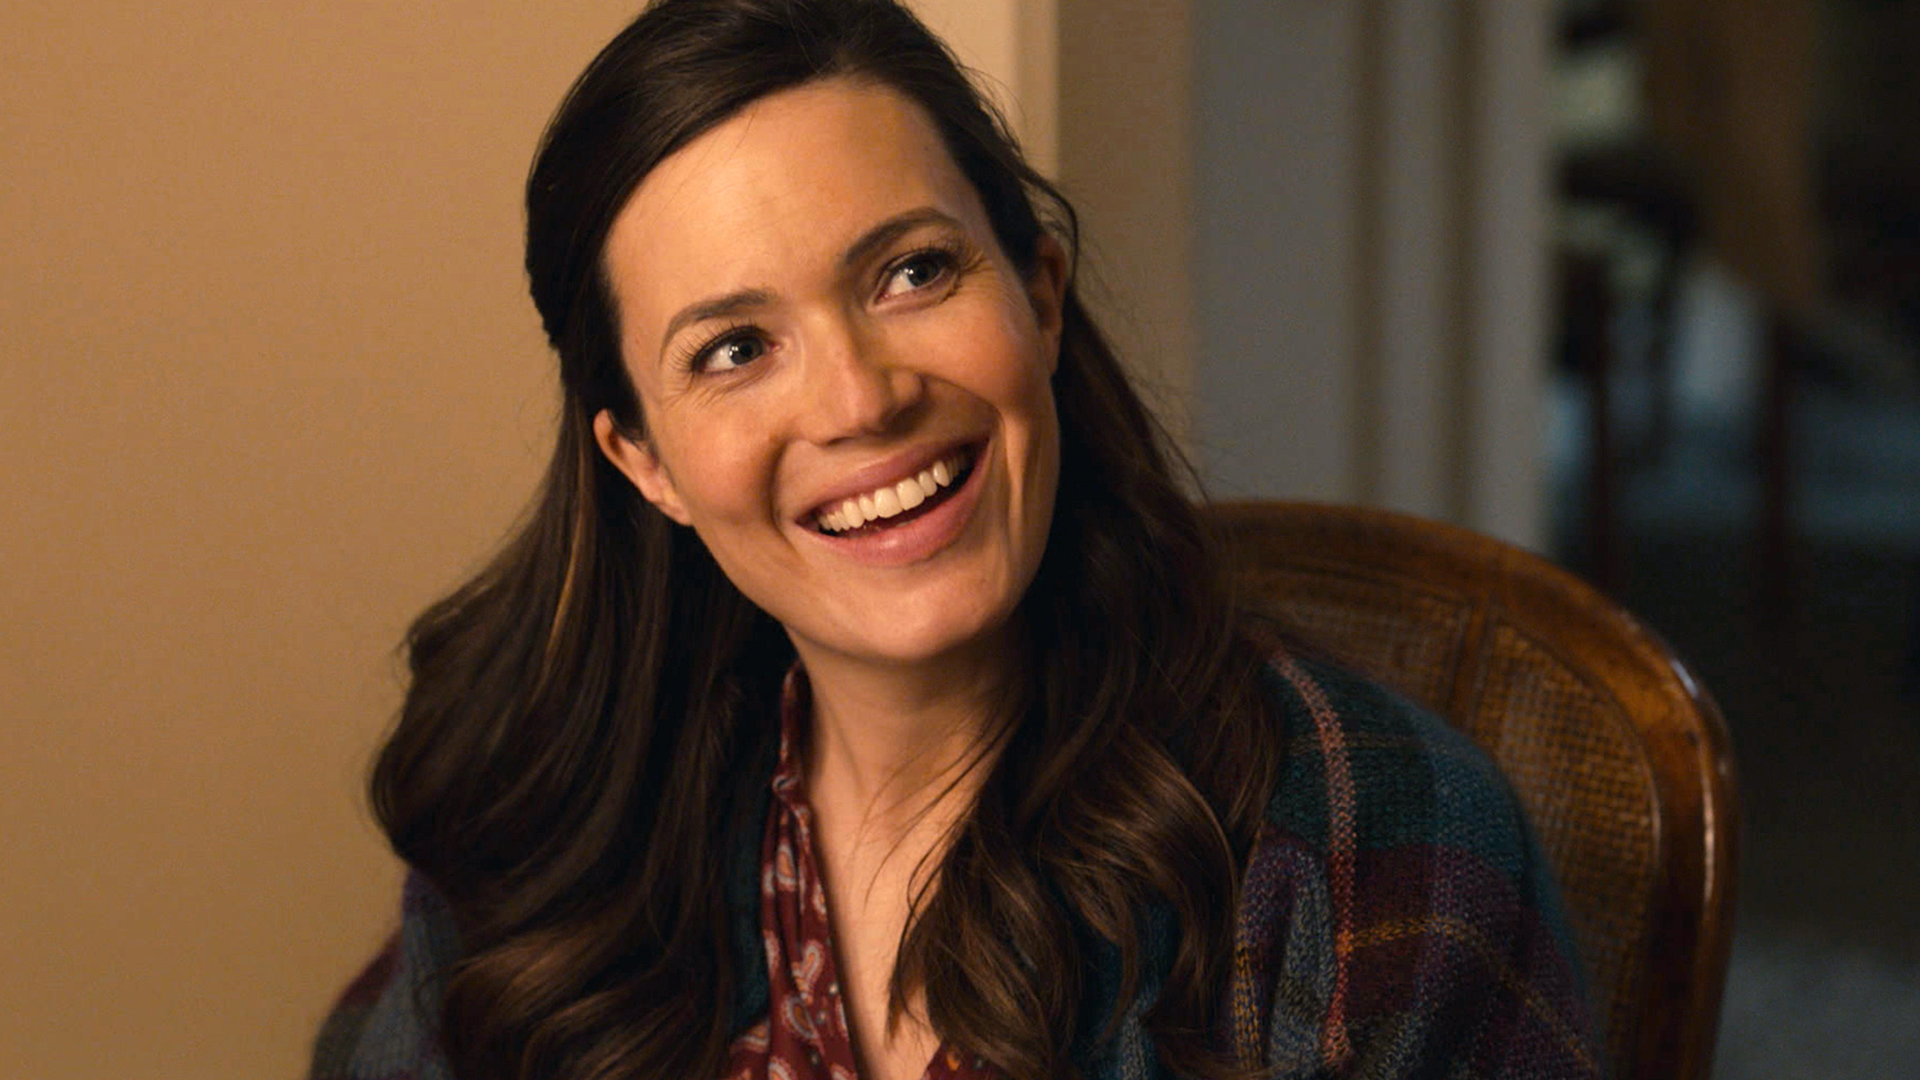 Mandy Moore as Rebecca Pearson smiling in ‘This Is Us’ Season 5 Episode 10, ‘I’ve Got This’